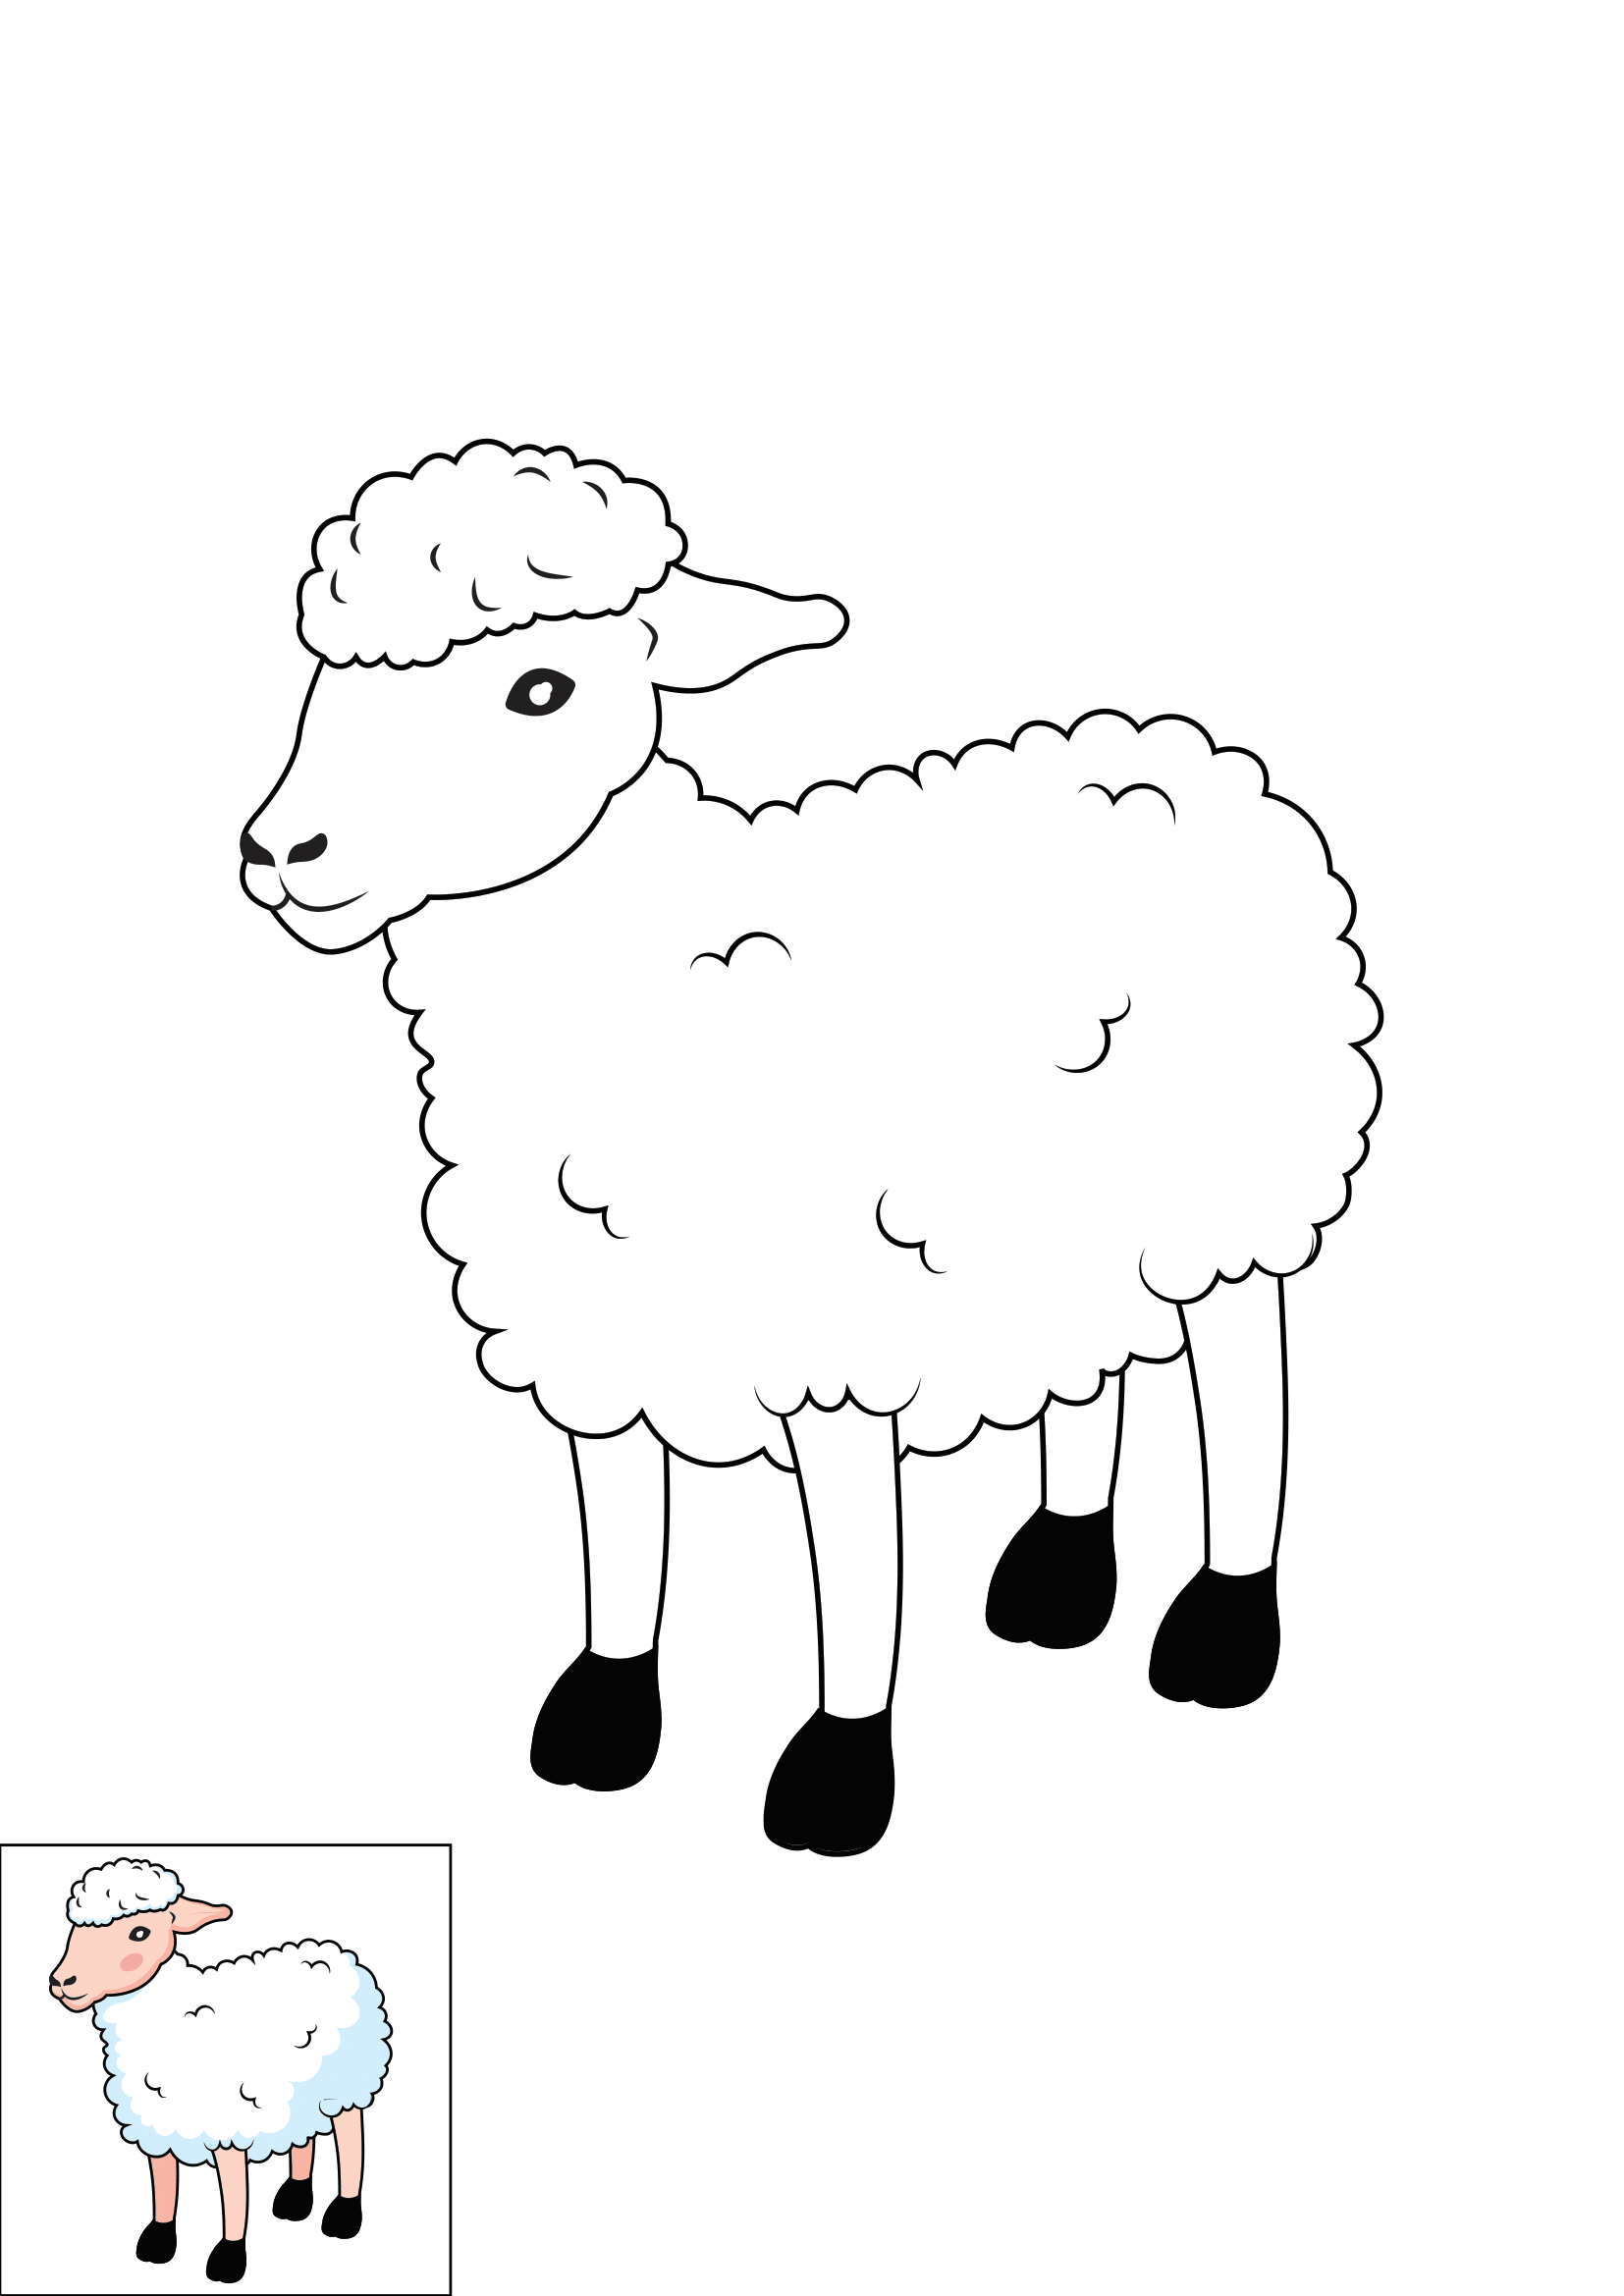 How to Draw A Sheep Step by Step Printable Color